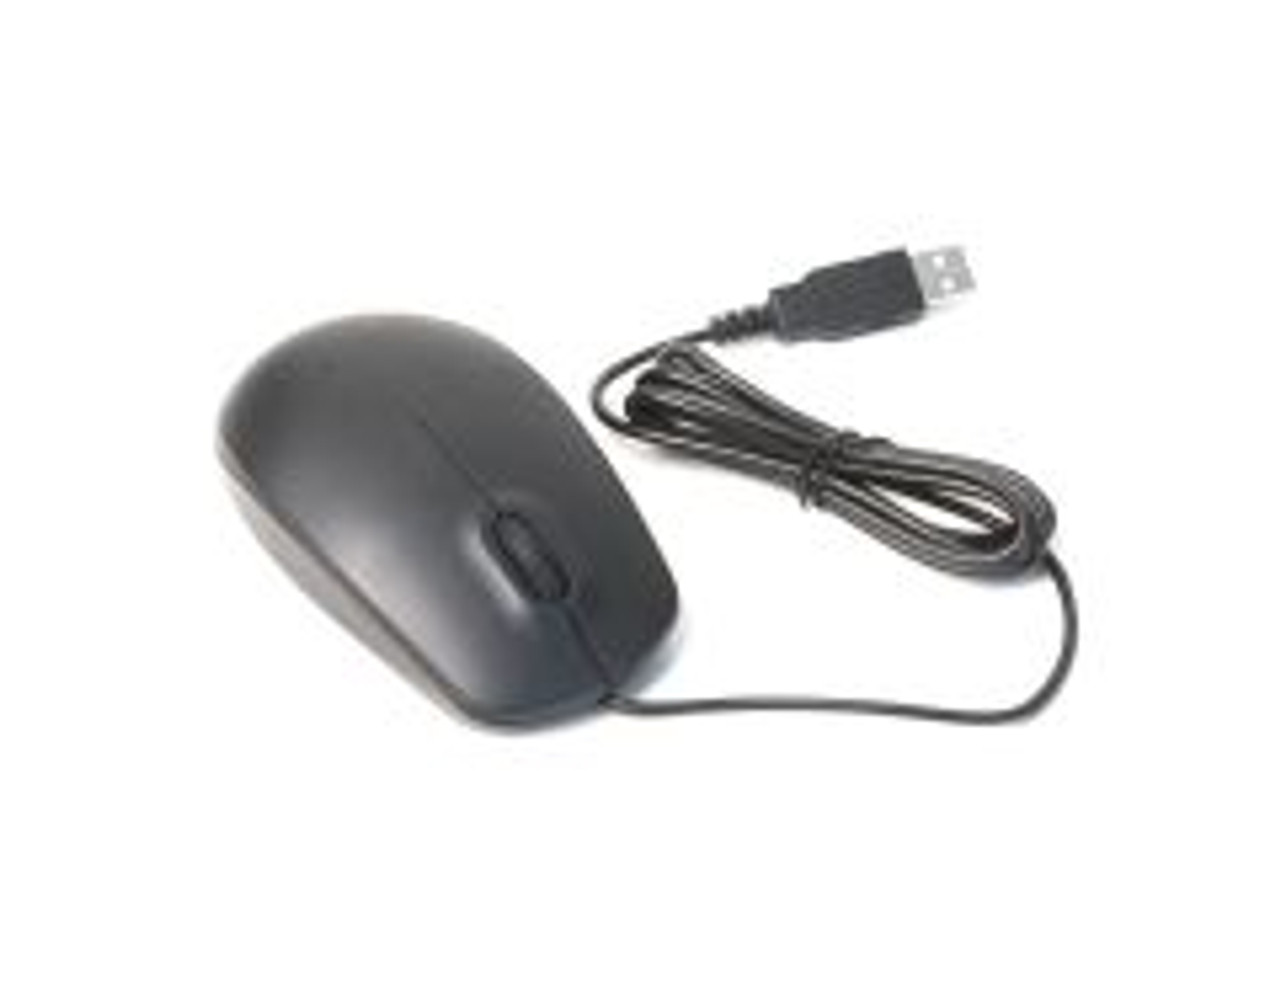 F5L016NEUSB-RED | Belkin | Retractable Usb Optical Mouse (Red)